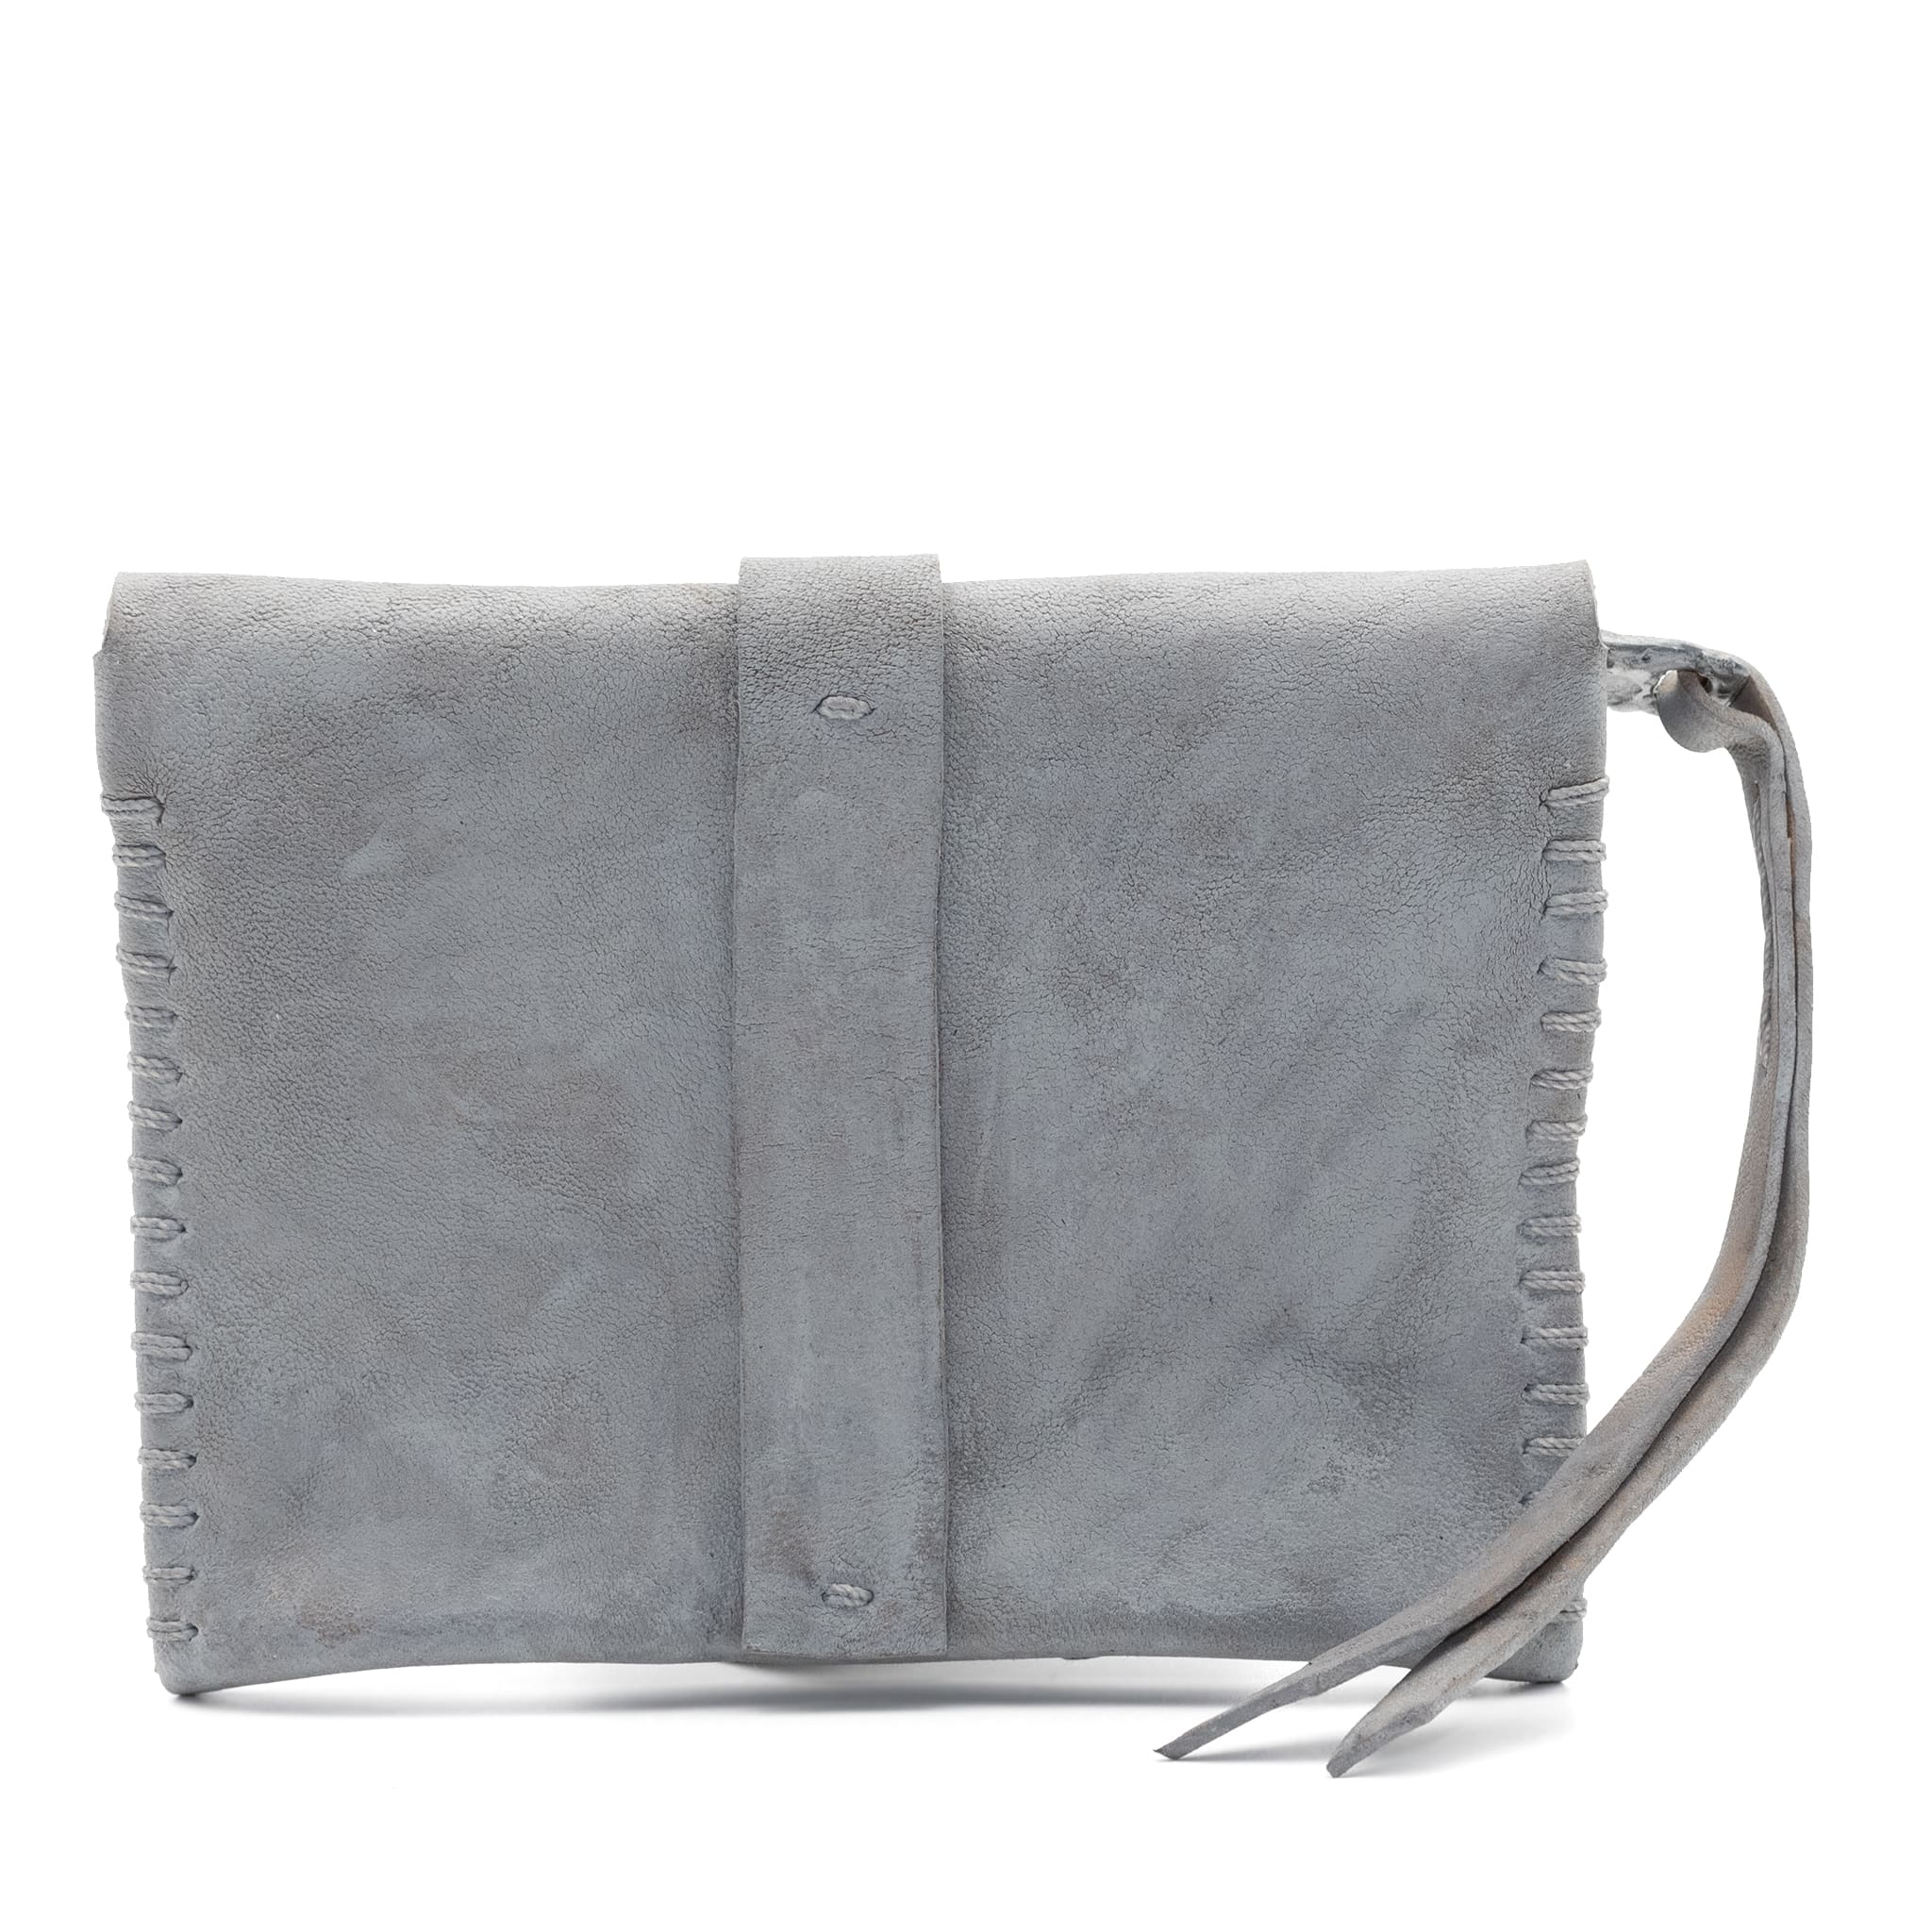 artisan hand sewn single piece object dyed zipper coin pouch available online at atelierskn.com